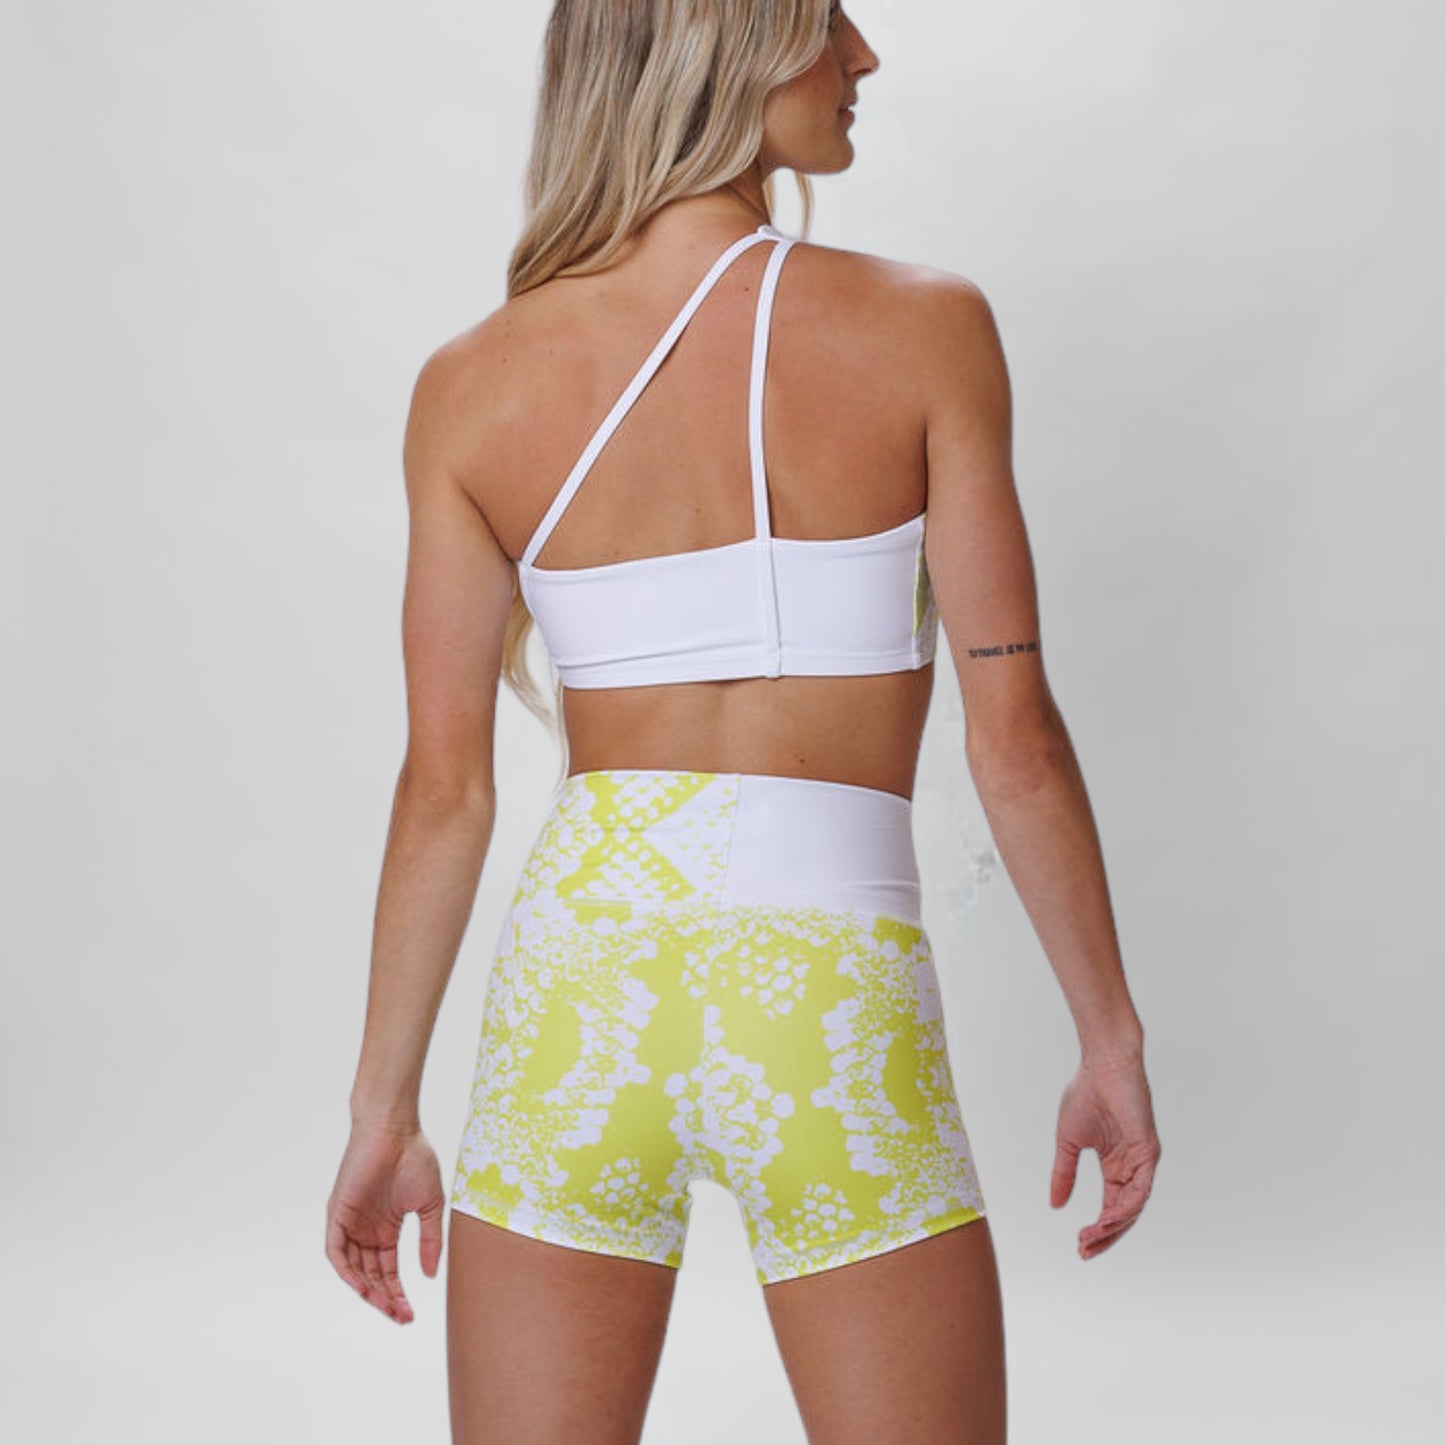 Look cool and feel confident in these Abi Shorts, crafted in butter soft fabric. The flattering high waist and curve of the leg line elongate your figure, while the drop v in the front helps show off your beautiful core. These shorts feature a perfect inseam that won't be too short, but still reveal your gorgeous stems.